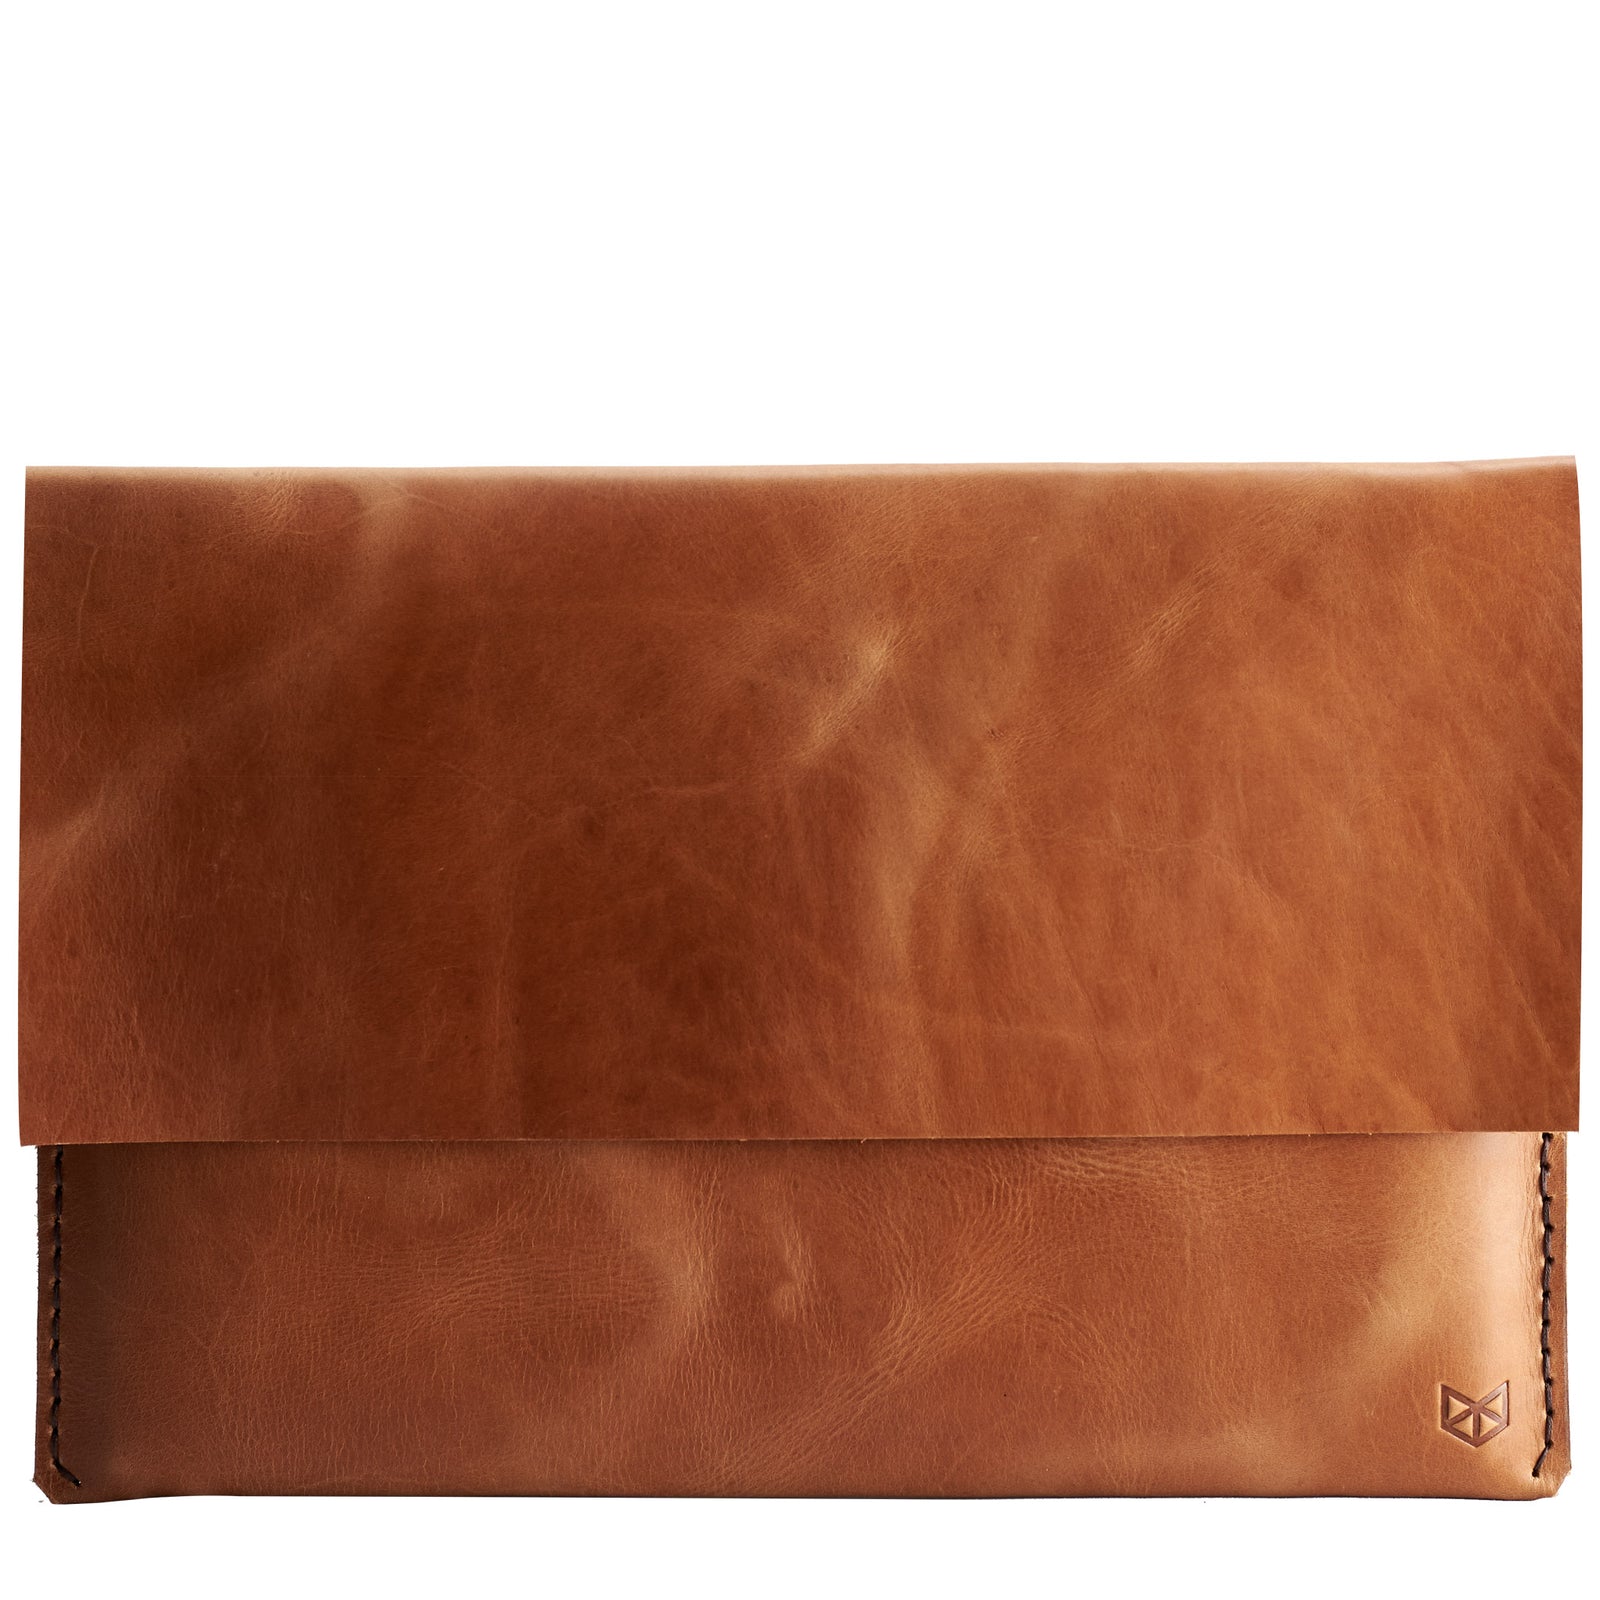 Leather Microsoft Surface  Sleeve Case by Capra Leather